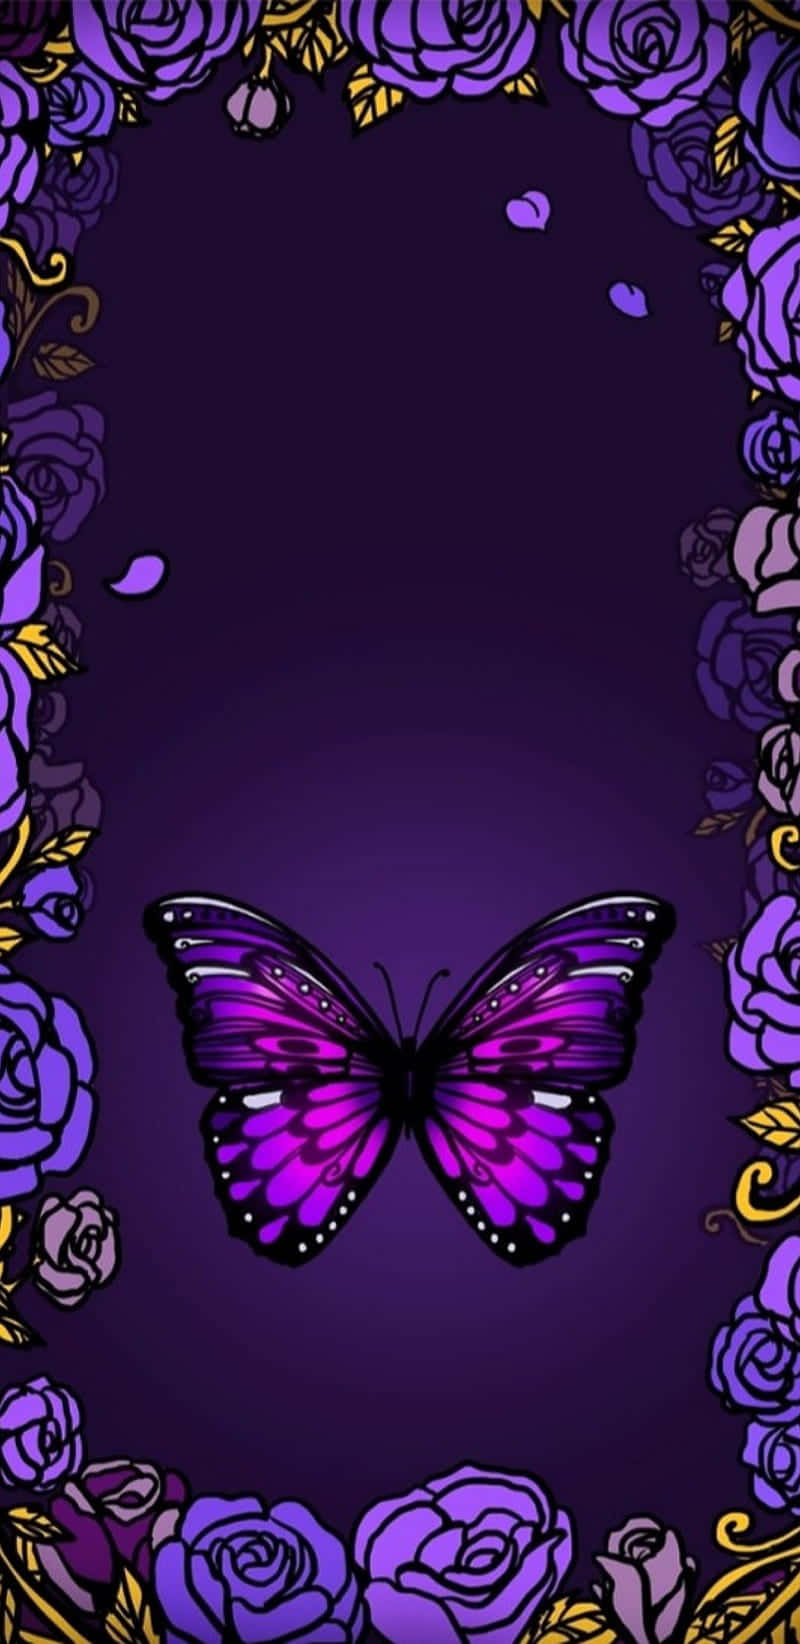 Purple Butterfly With Roses On A Purple Background Wallpaper